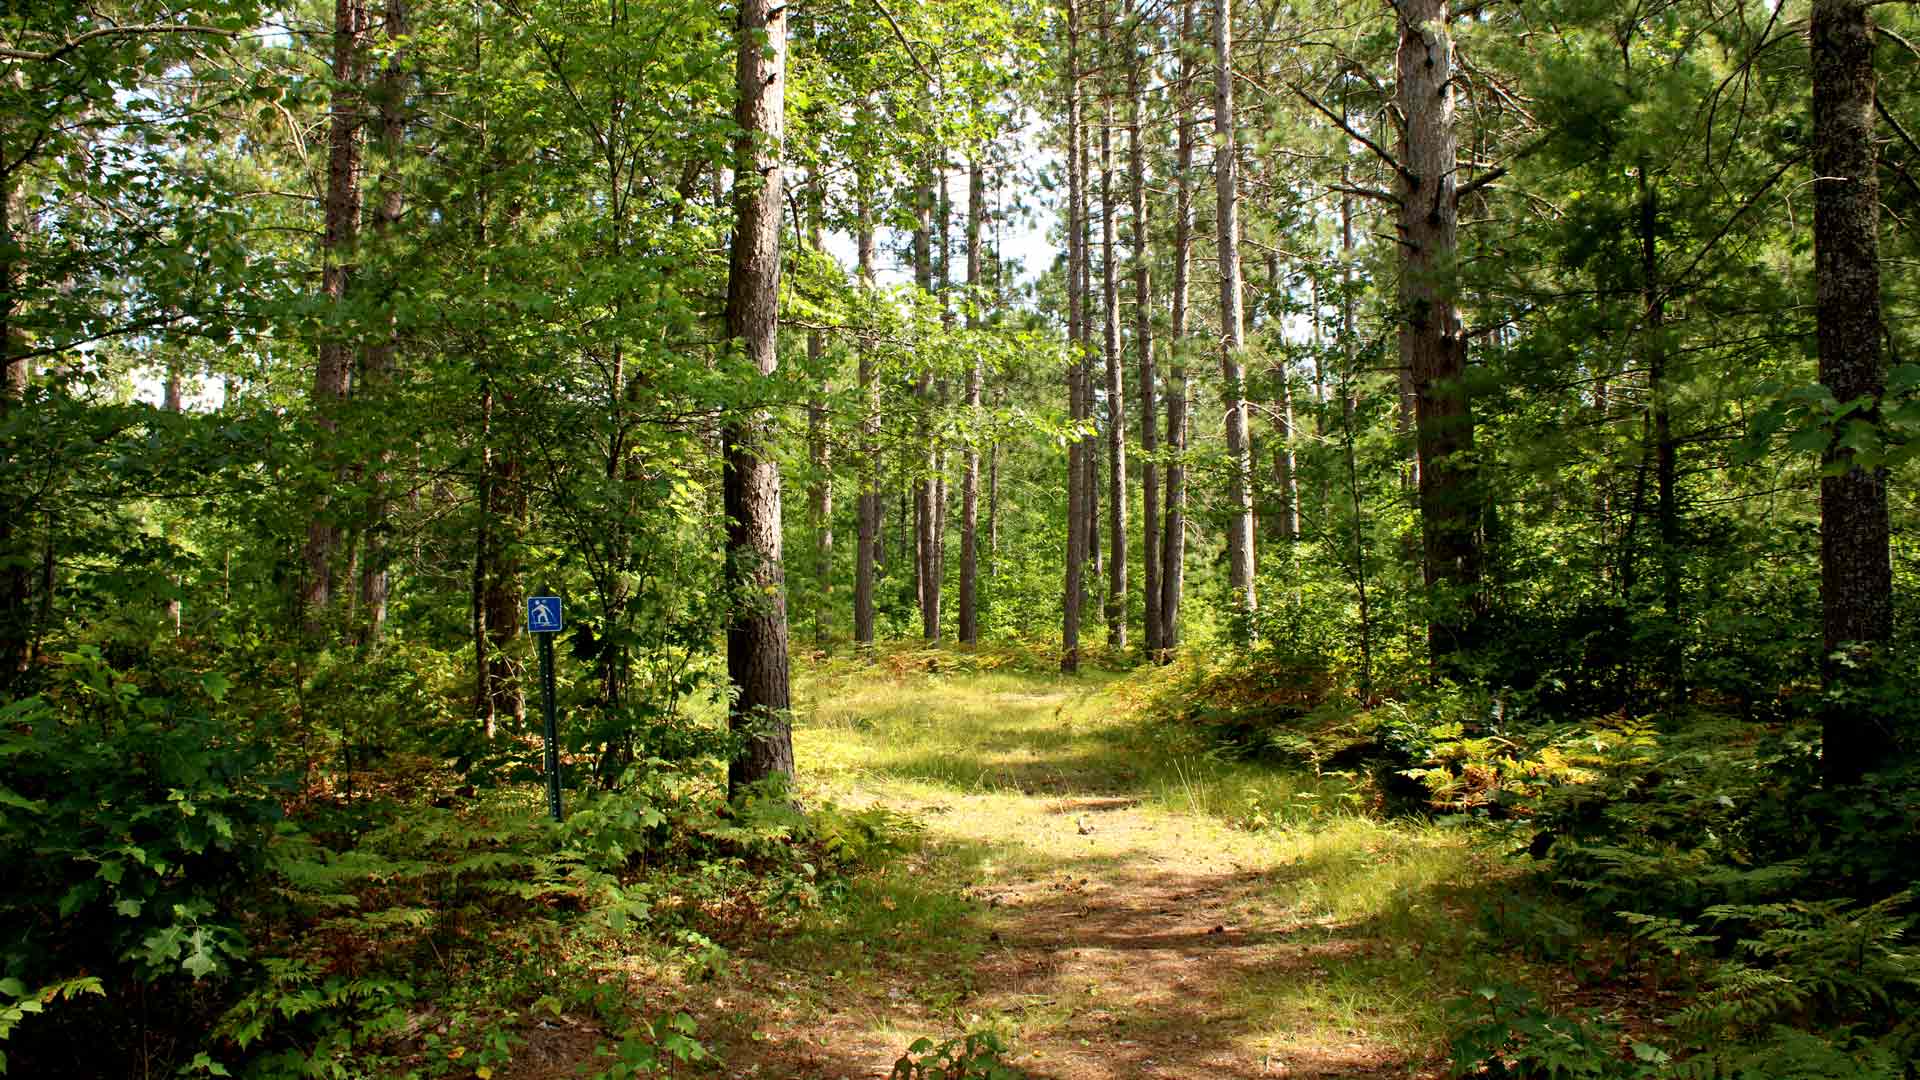 Path through green forest of Pioneer Creek Trail in Vilas County, Wisconsin